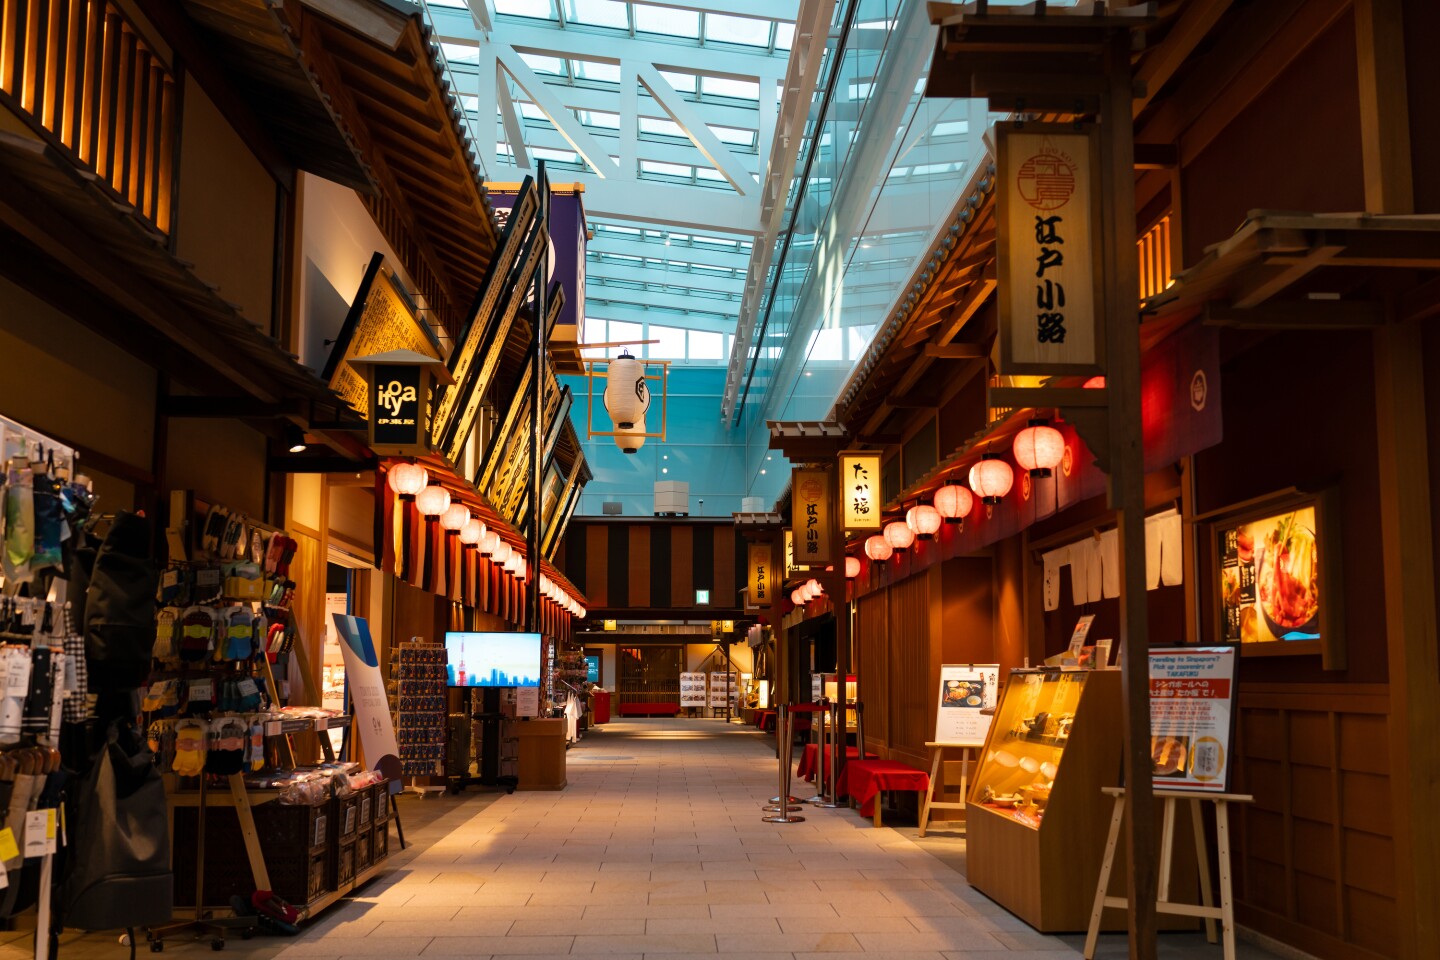 <a>The Edo marketplace in Haneda's Terminal 3 is a collection of shops and restaurants featuring traditional Japanese design.</a>